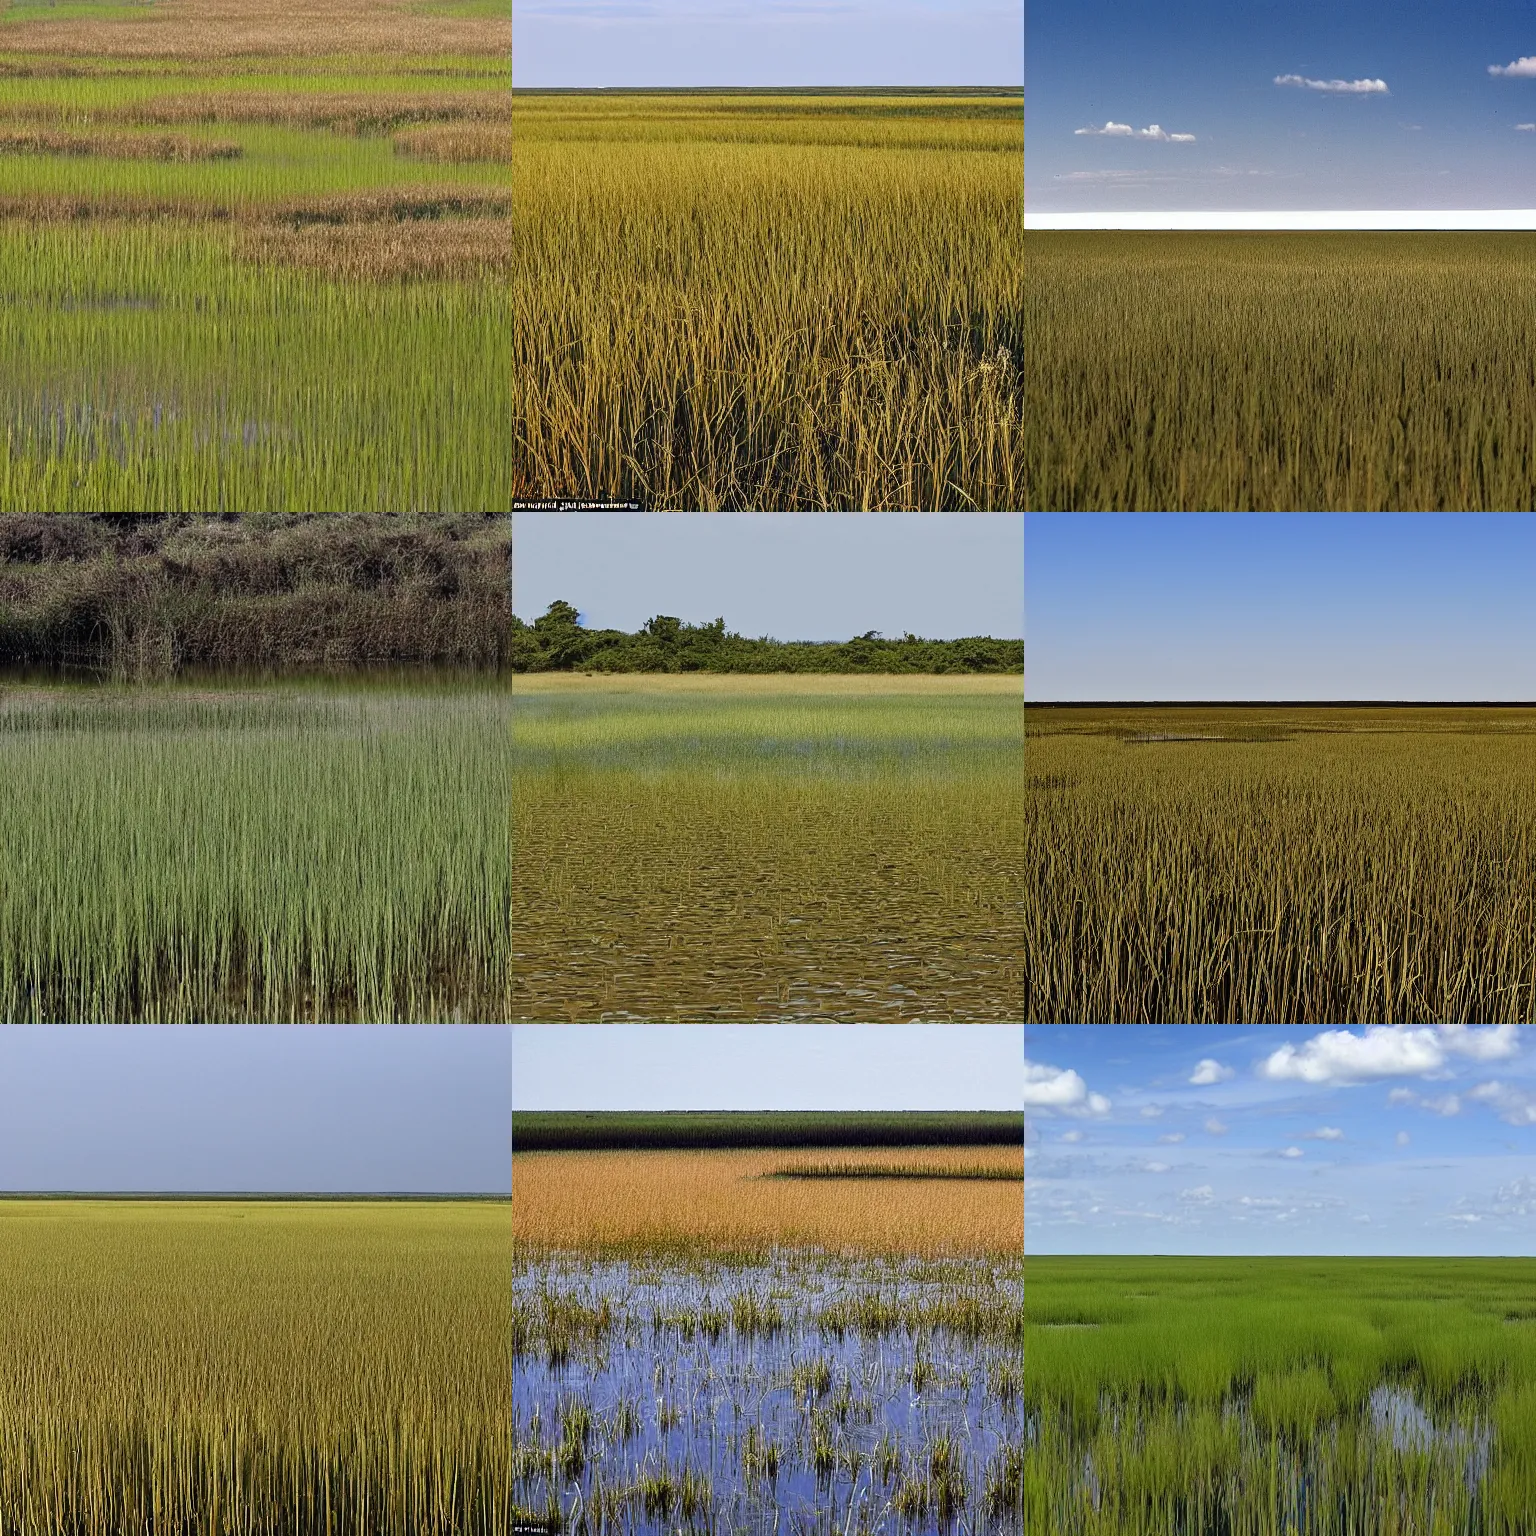 Prompt: afar at ground level, the marsh appears to be a flat plain covered in a tall sea of sedges. The marsh itself is actually uneven, with several large pools dotted about